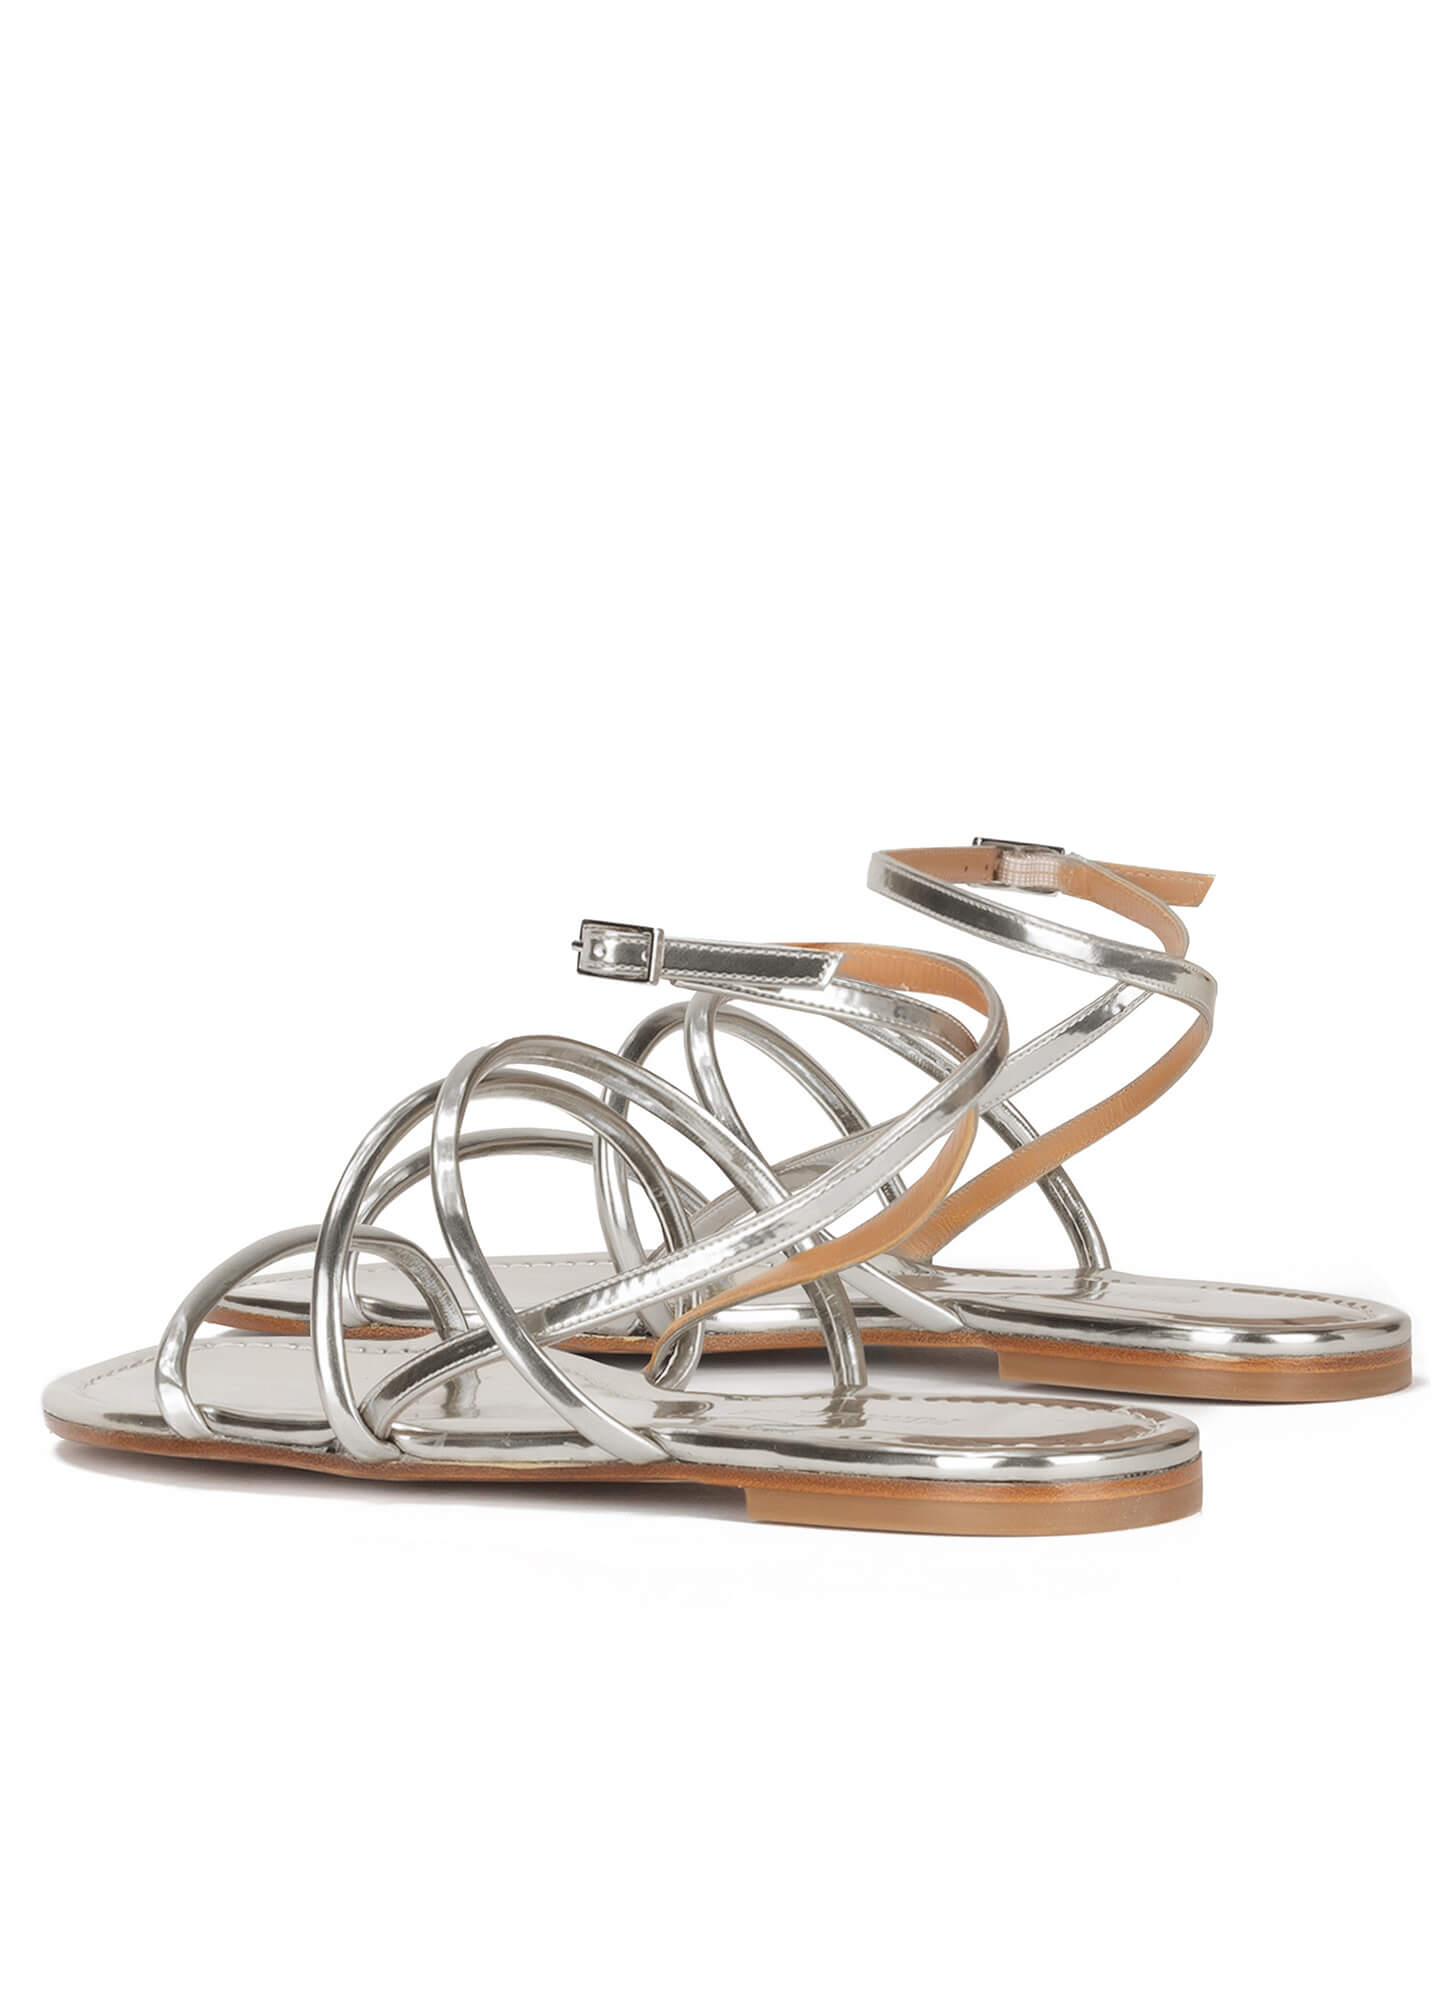 Strappy flat sandals in silver leather . PURA LOPEZ